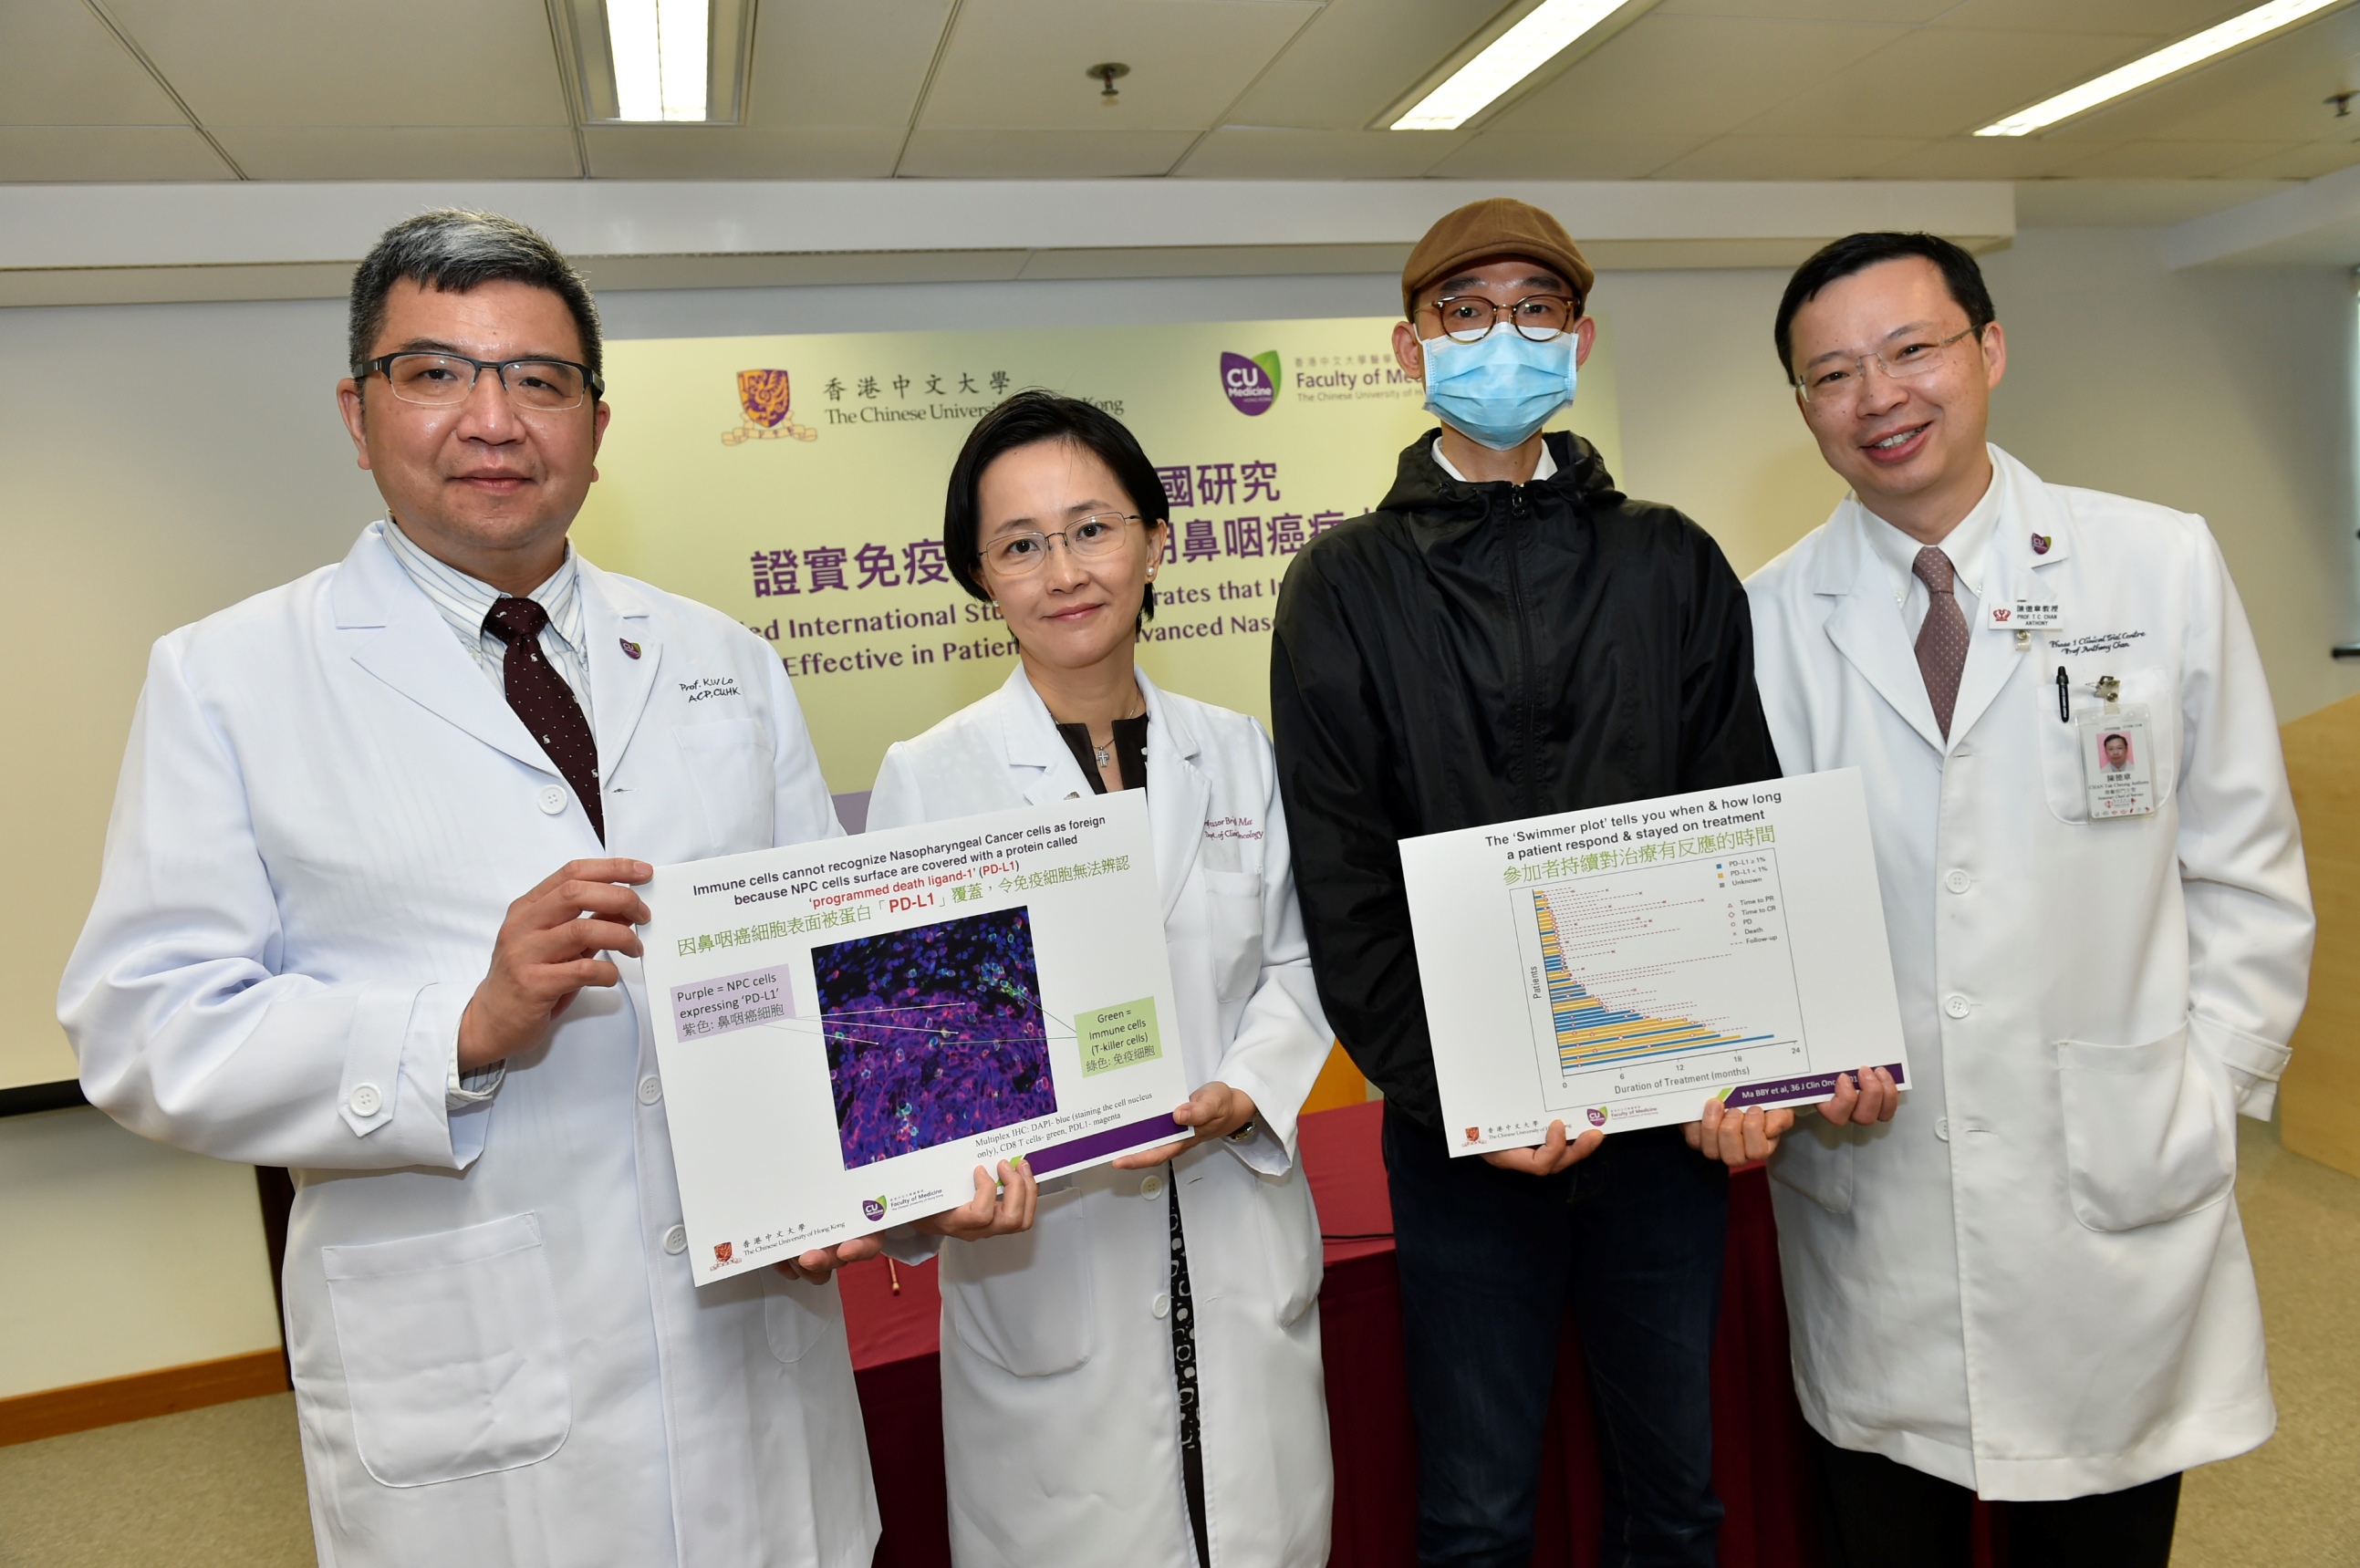 Researchers from the Faculty of Medicine at CUHK led an international study which demonstrates the anti-tumour activity of immunotherapy in recurrent and metastatic nasopharyngeal cancer (NPC) patients. Results show the 1-year overall survival rate was around 60%. (From left) Professor Kwok Wai LO of the Department of Anatomical and Cellular Pathology; Professor Brigette MA of the Department of Clinical Oncology; NPC patient Mr CHAN (pseudo name) and Professor Anthony CHAN, Li Shu Fan Medical Foundation Professor of Clinical Oncology.